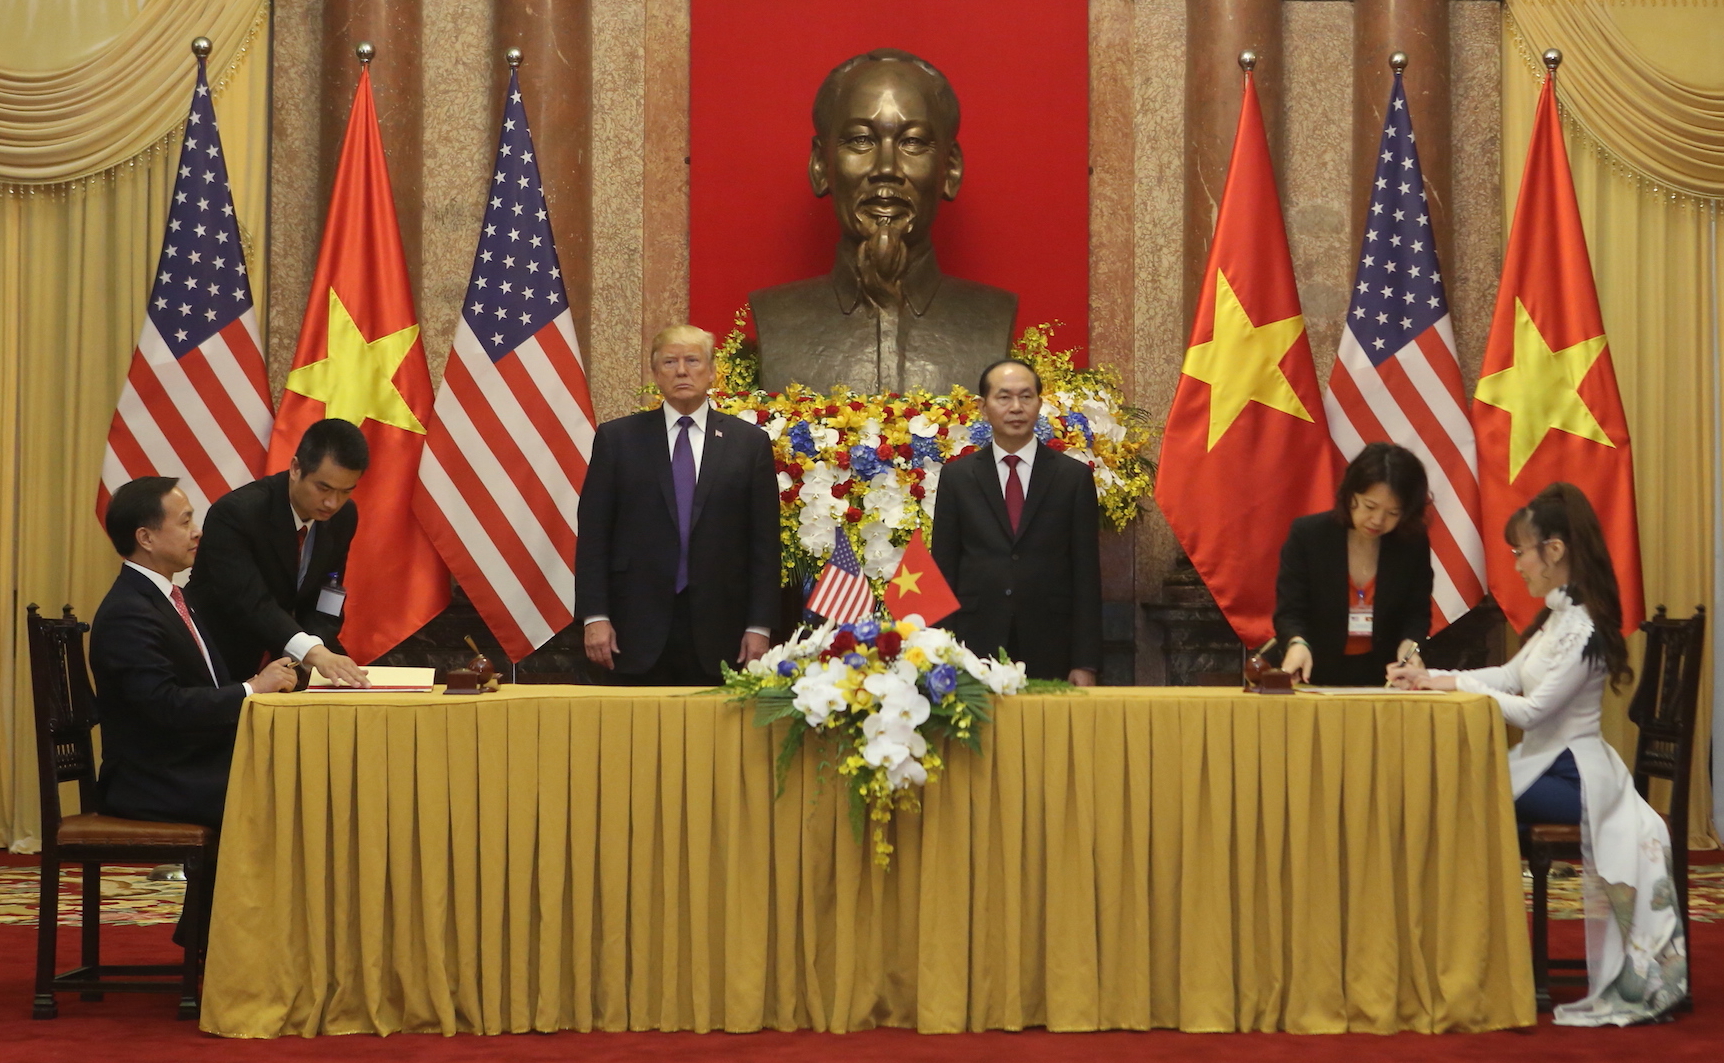 The signing ceremony took place in Hanoi that was attended by President of the Socialist Republic of Vietnam Trần Đại Quang and U.S. President Donald Trump, along with officials from Vietjet and Pratt & Whitney. Click to enlarge.